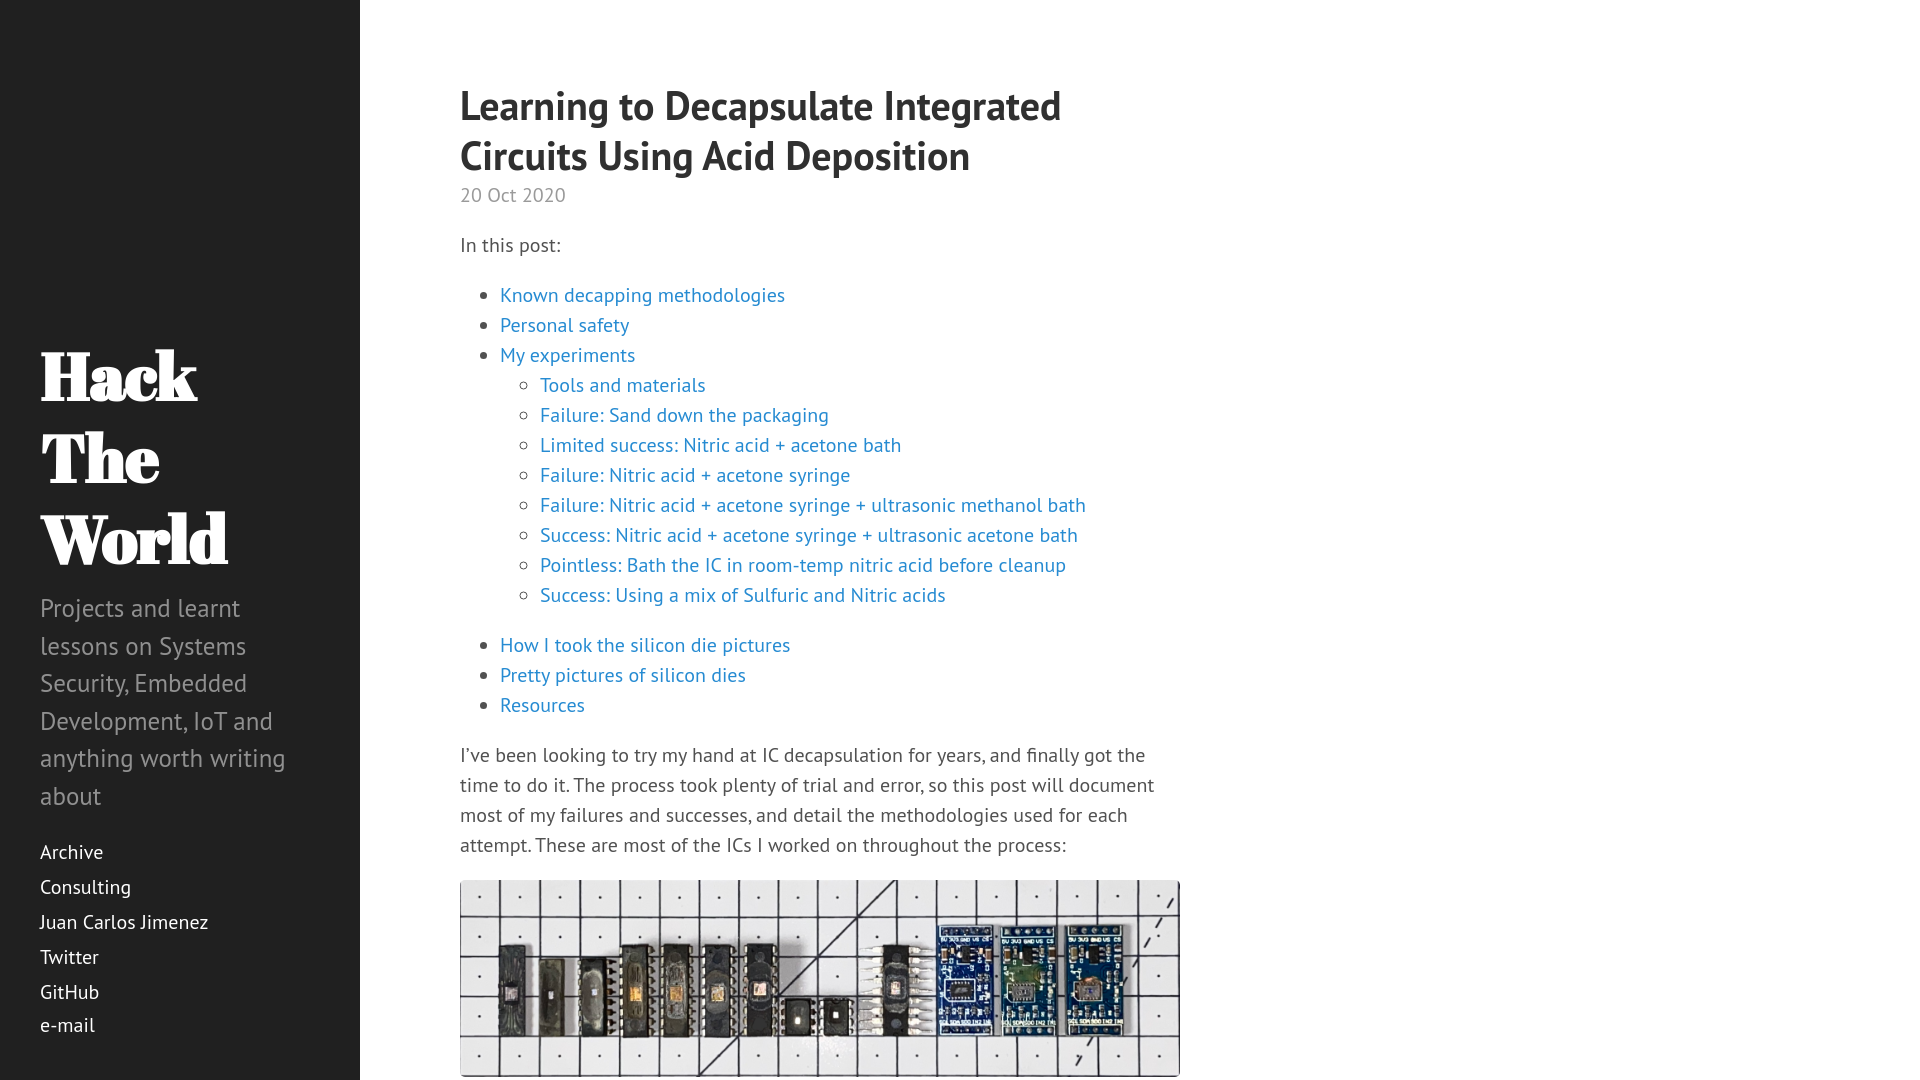 Learning to Decapsulate Integrated Circuits Using Acid Deposition · Hack The World